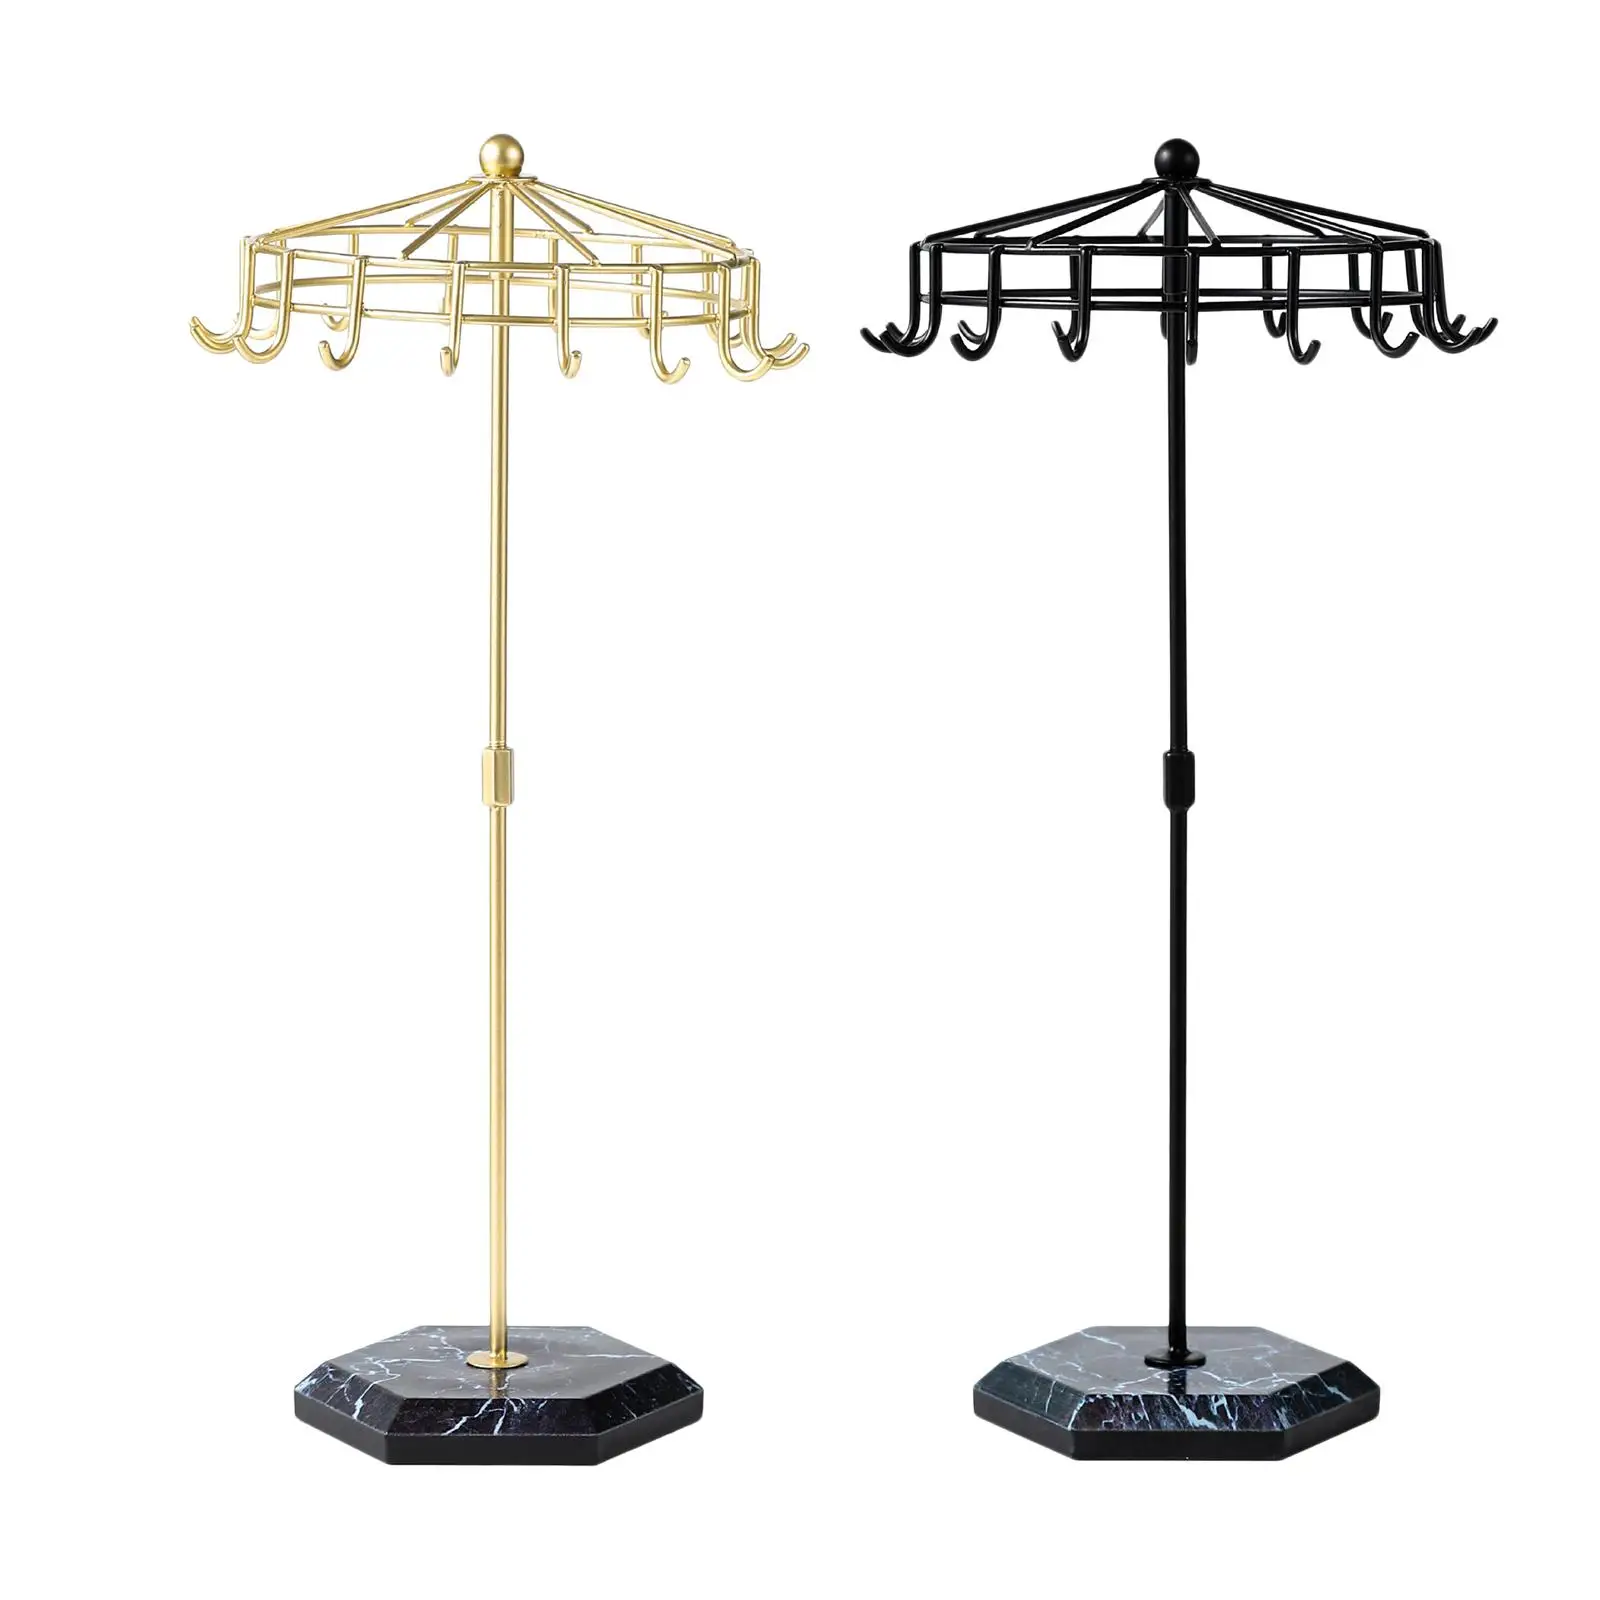 

Jewelry Display Stand for Necklaces Bracelets Iron Jewelry Organizer for Home Vanity Mall Exhibition Retail Store Show Showcase